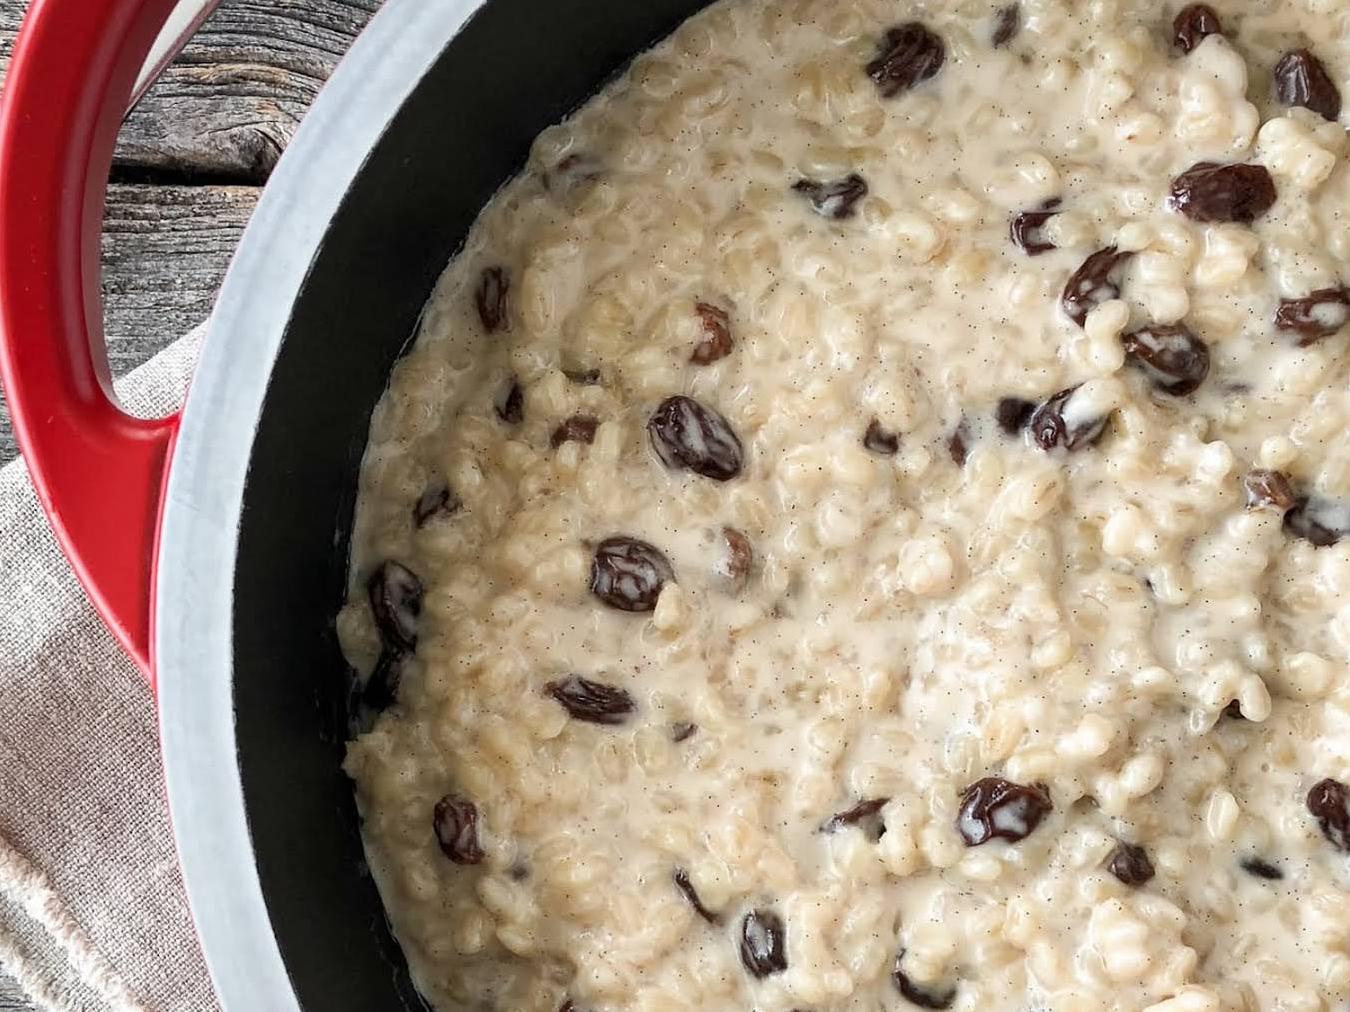  Can't decide between dessert or breakfast? This barley pudding can be enjoyed any time of day!